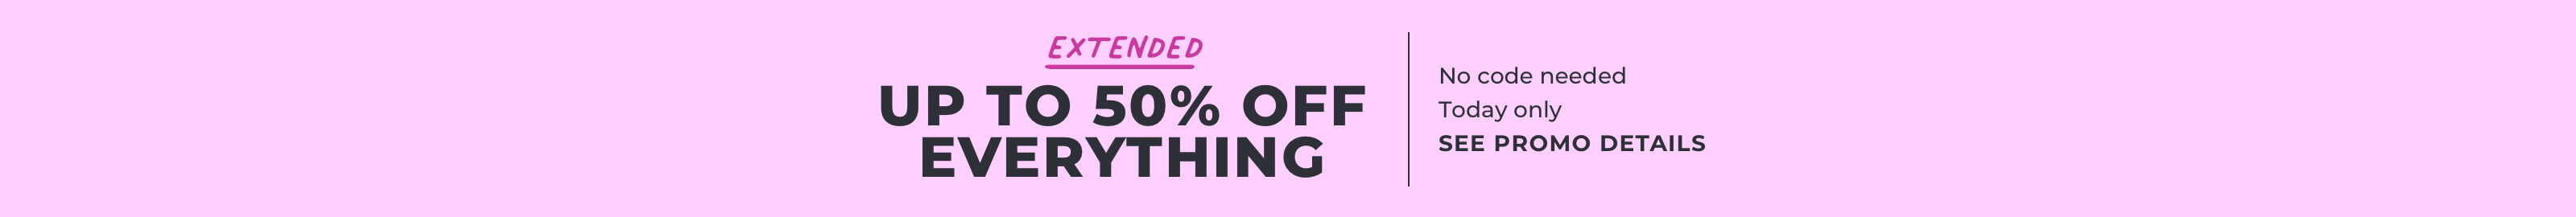 Extended Up to 50% off everything, no code needed, Today only, see promo details